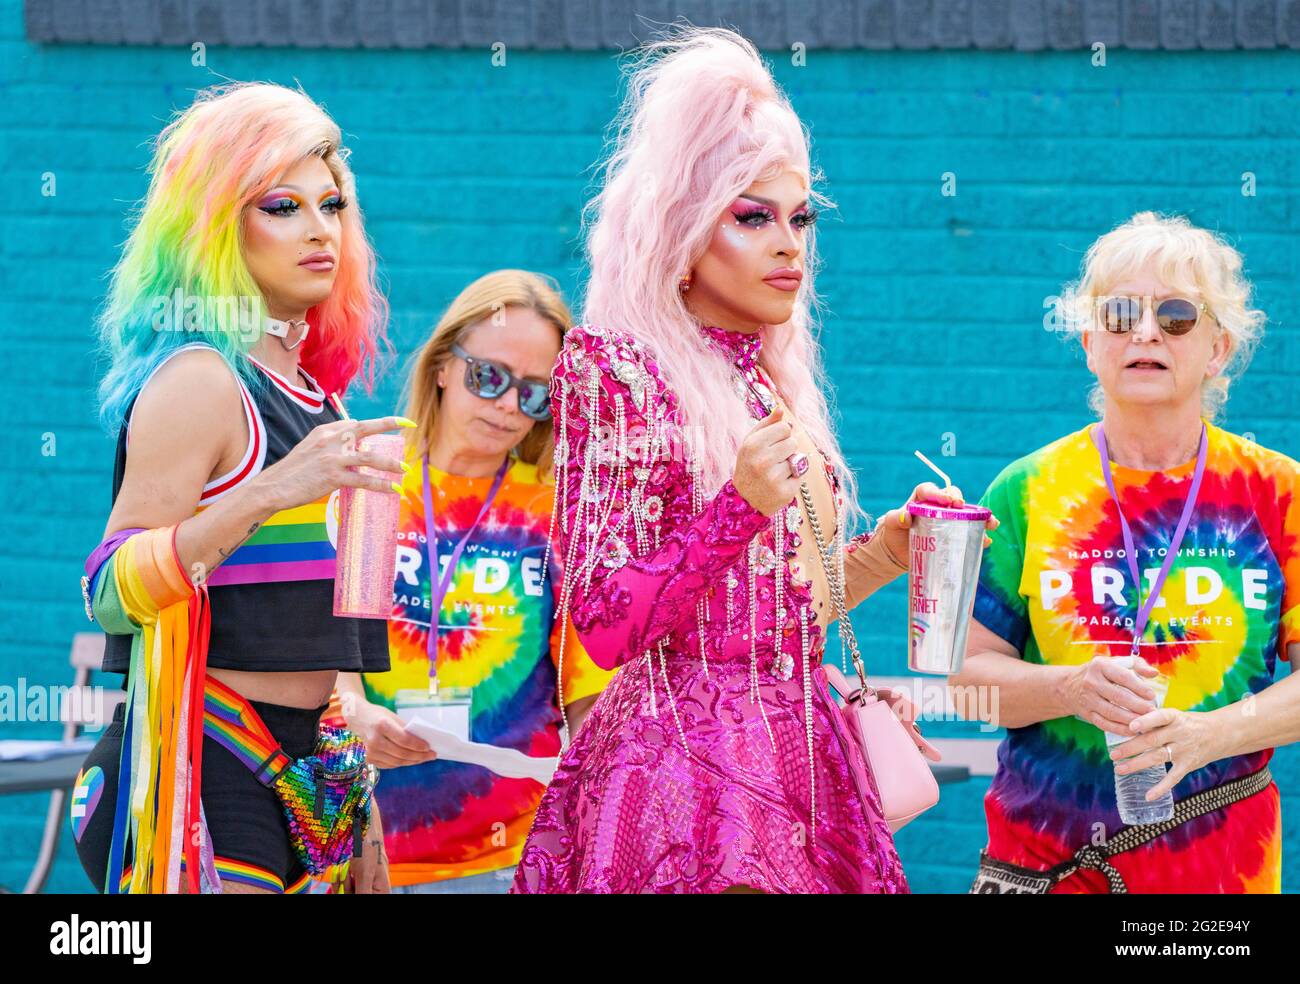 Collingswood, New Jersey, USA. 10th June, 2021. FRANCHESCA FROSE, left, and ARIEL  VERSACE, both of Cherry Hill, New Jersey, prepare to enter the Haddon  Township Pride Parade Thursday in downtown Collingswood, New